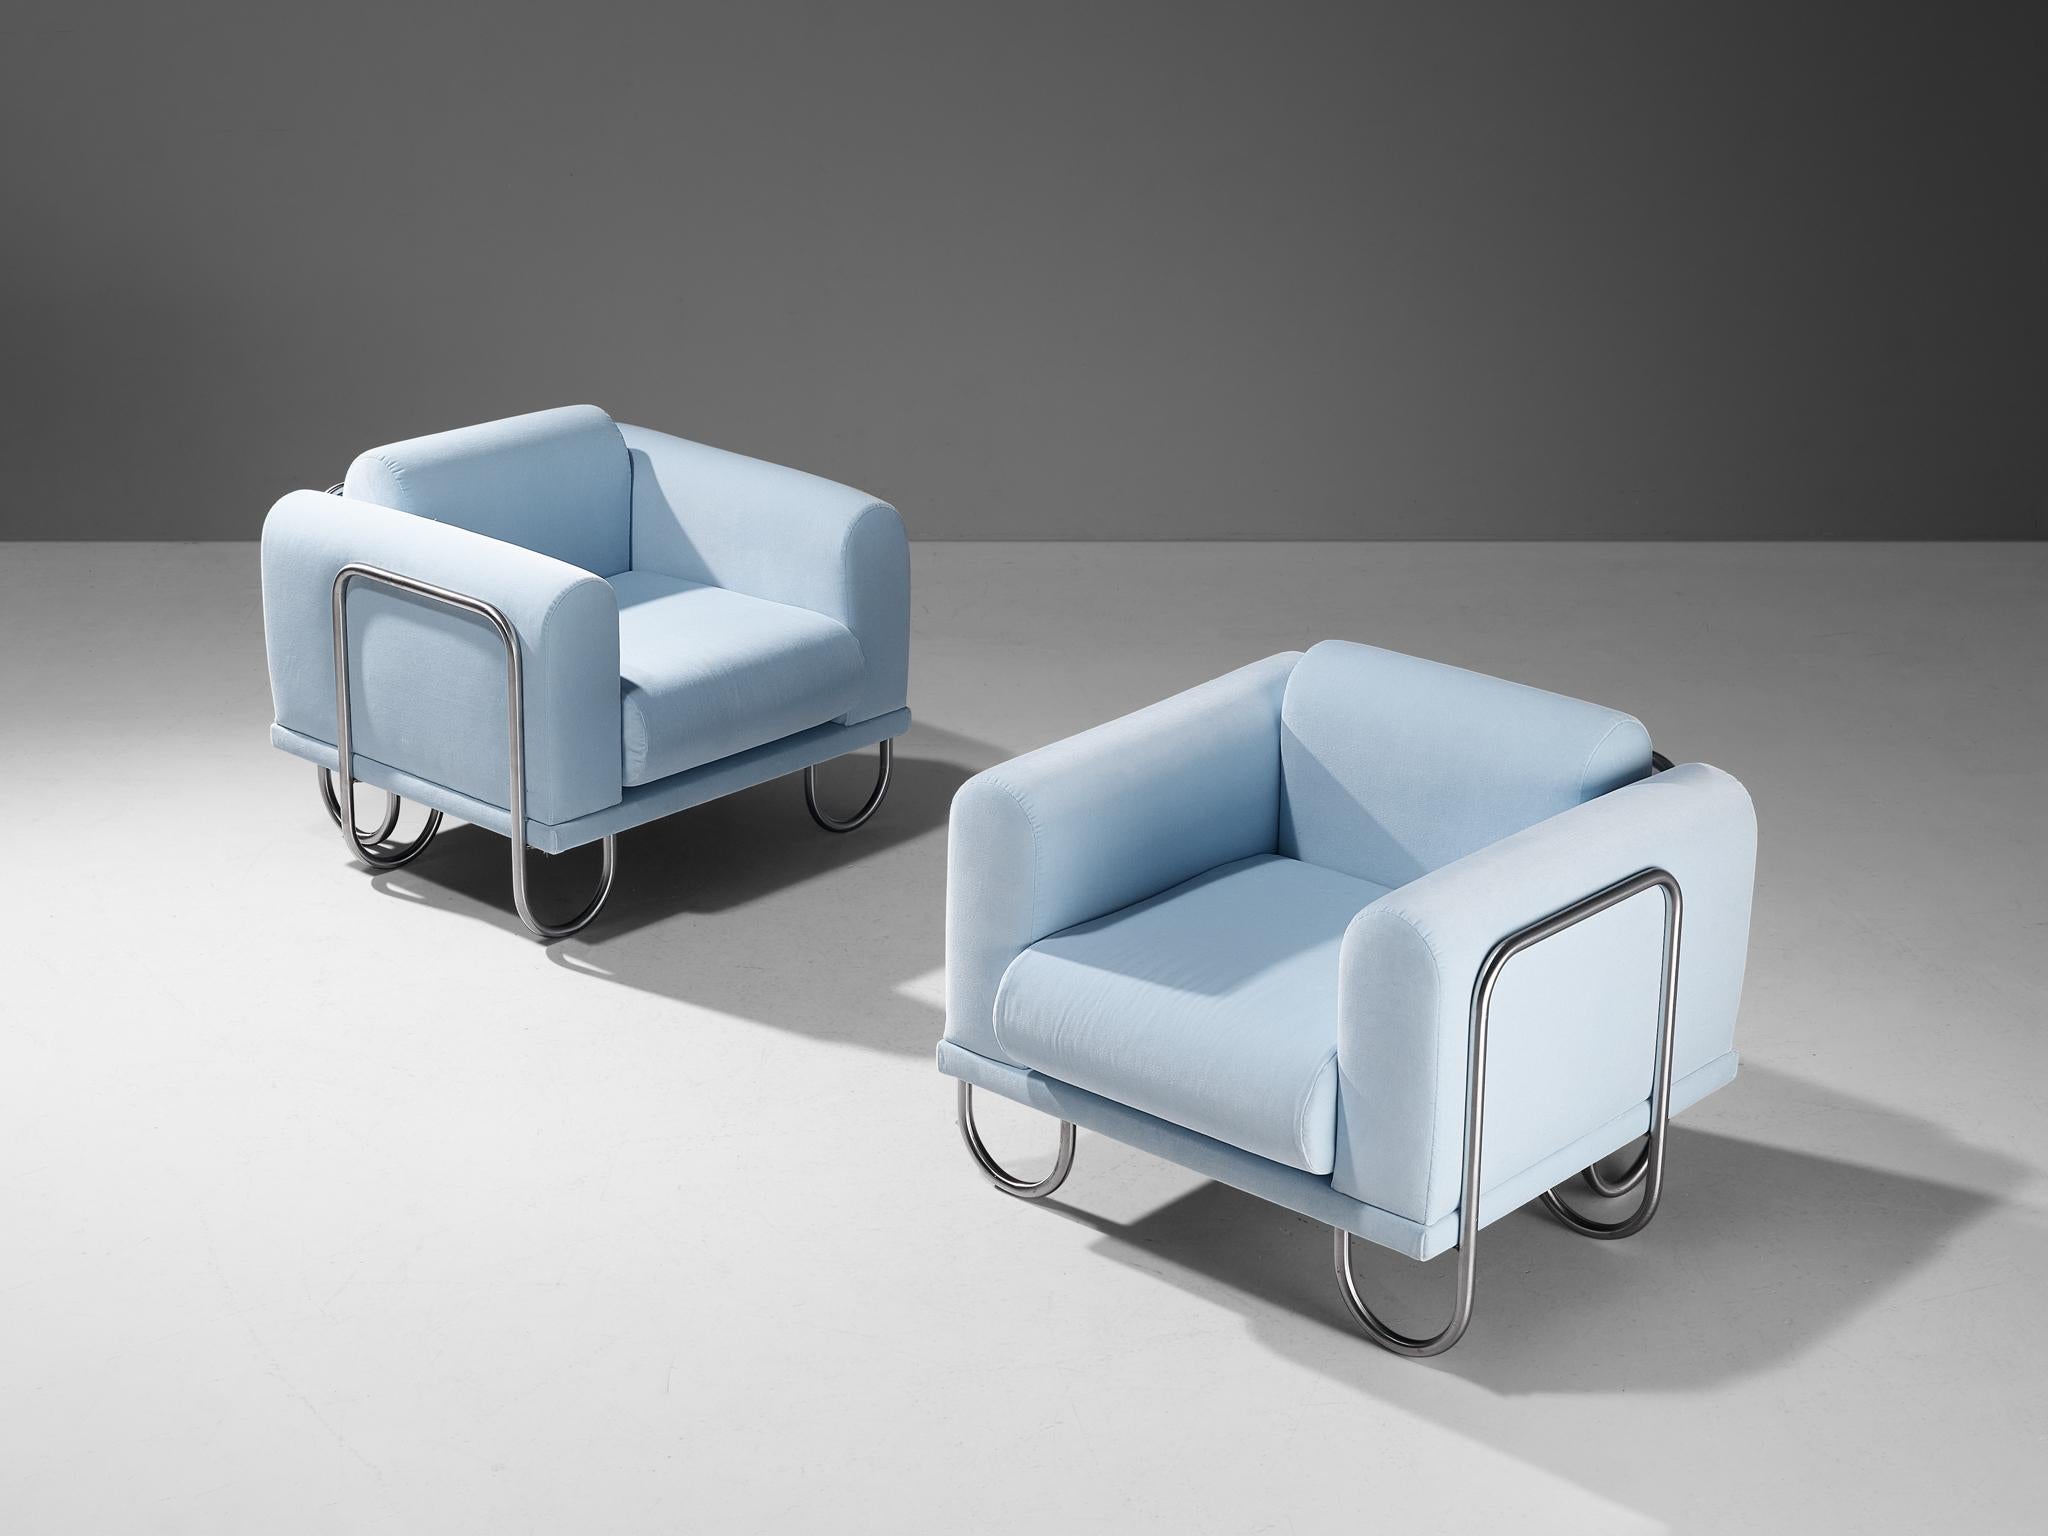 Byron Botker for Landes, club chairs, light blue fabric, chrome-plated steel, United States, 1970s

A comfortable easy chair that features a curved, chromed tubular frame. The frame appears to be an ongoing curved line, moving upwards to support the